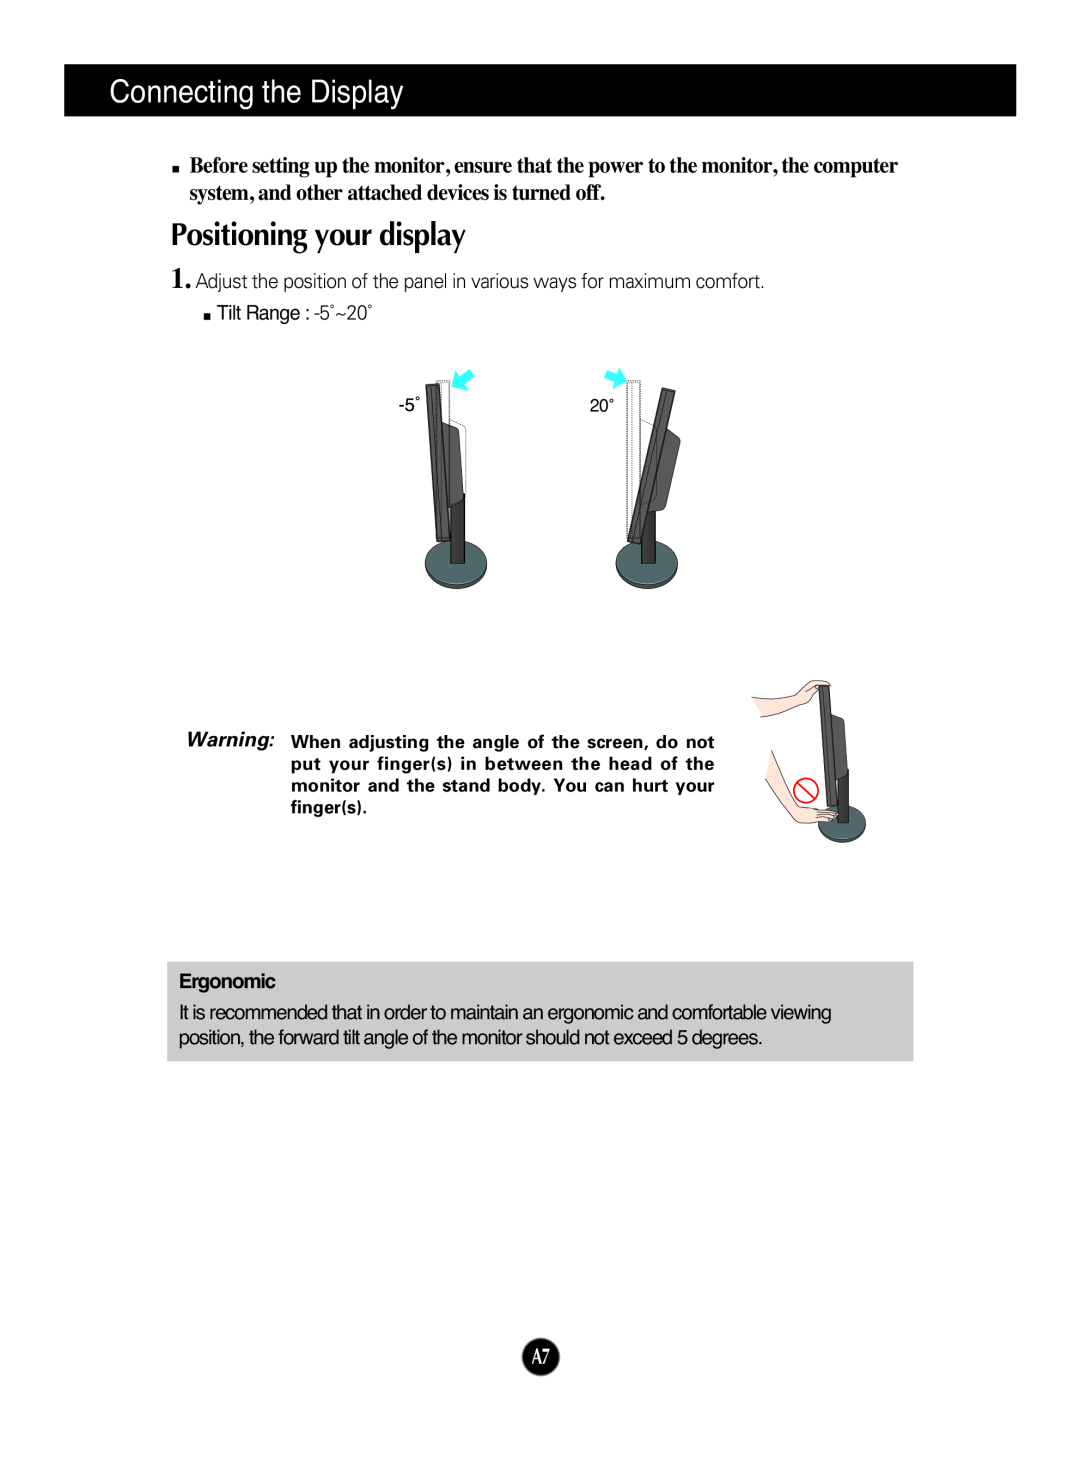 LG Electronics L194WS, L204WS manual Positioning your display, Connecting the Display, Ergonomic 